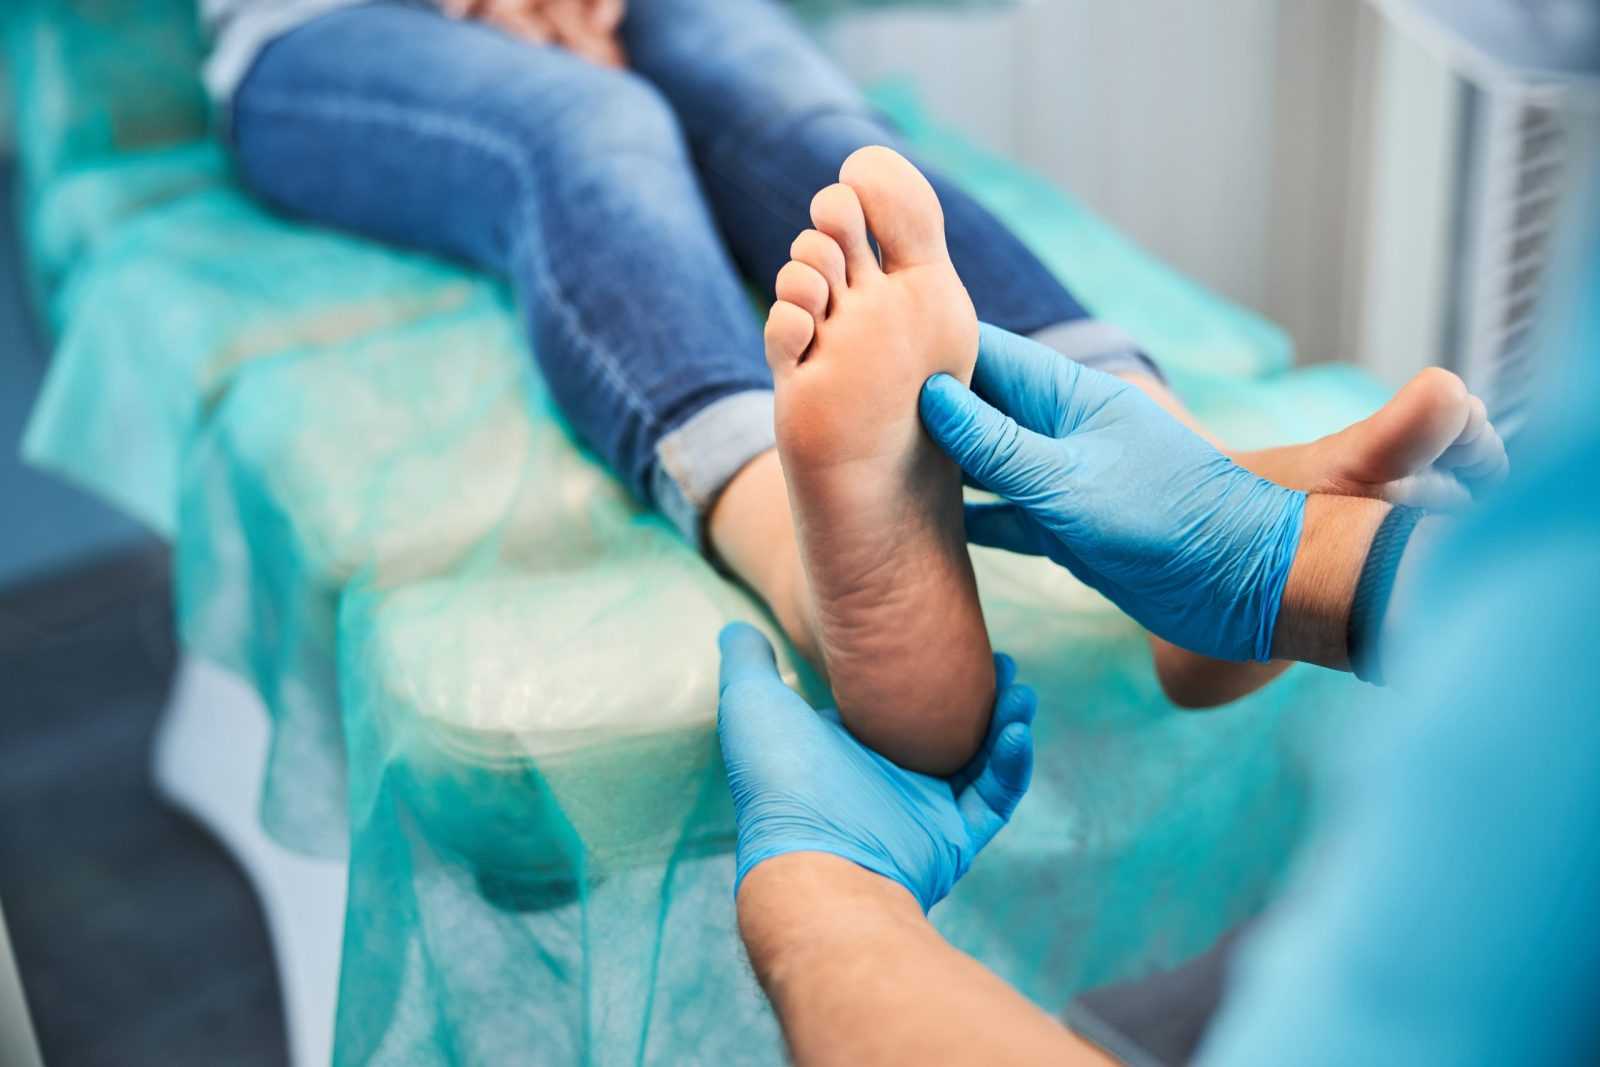 podiatrist checking foot of a patient